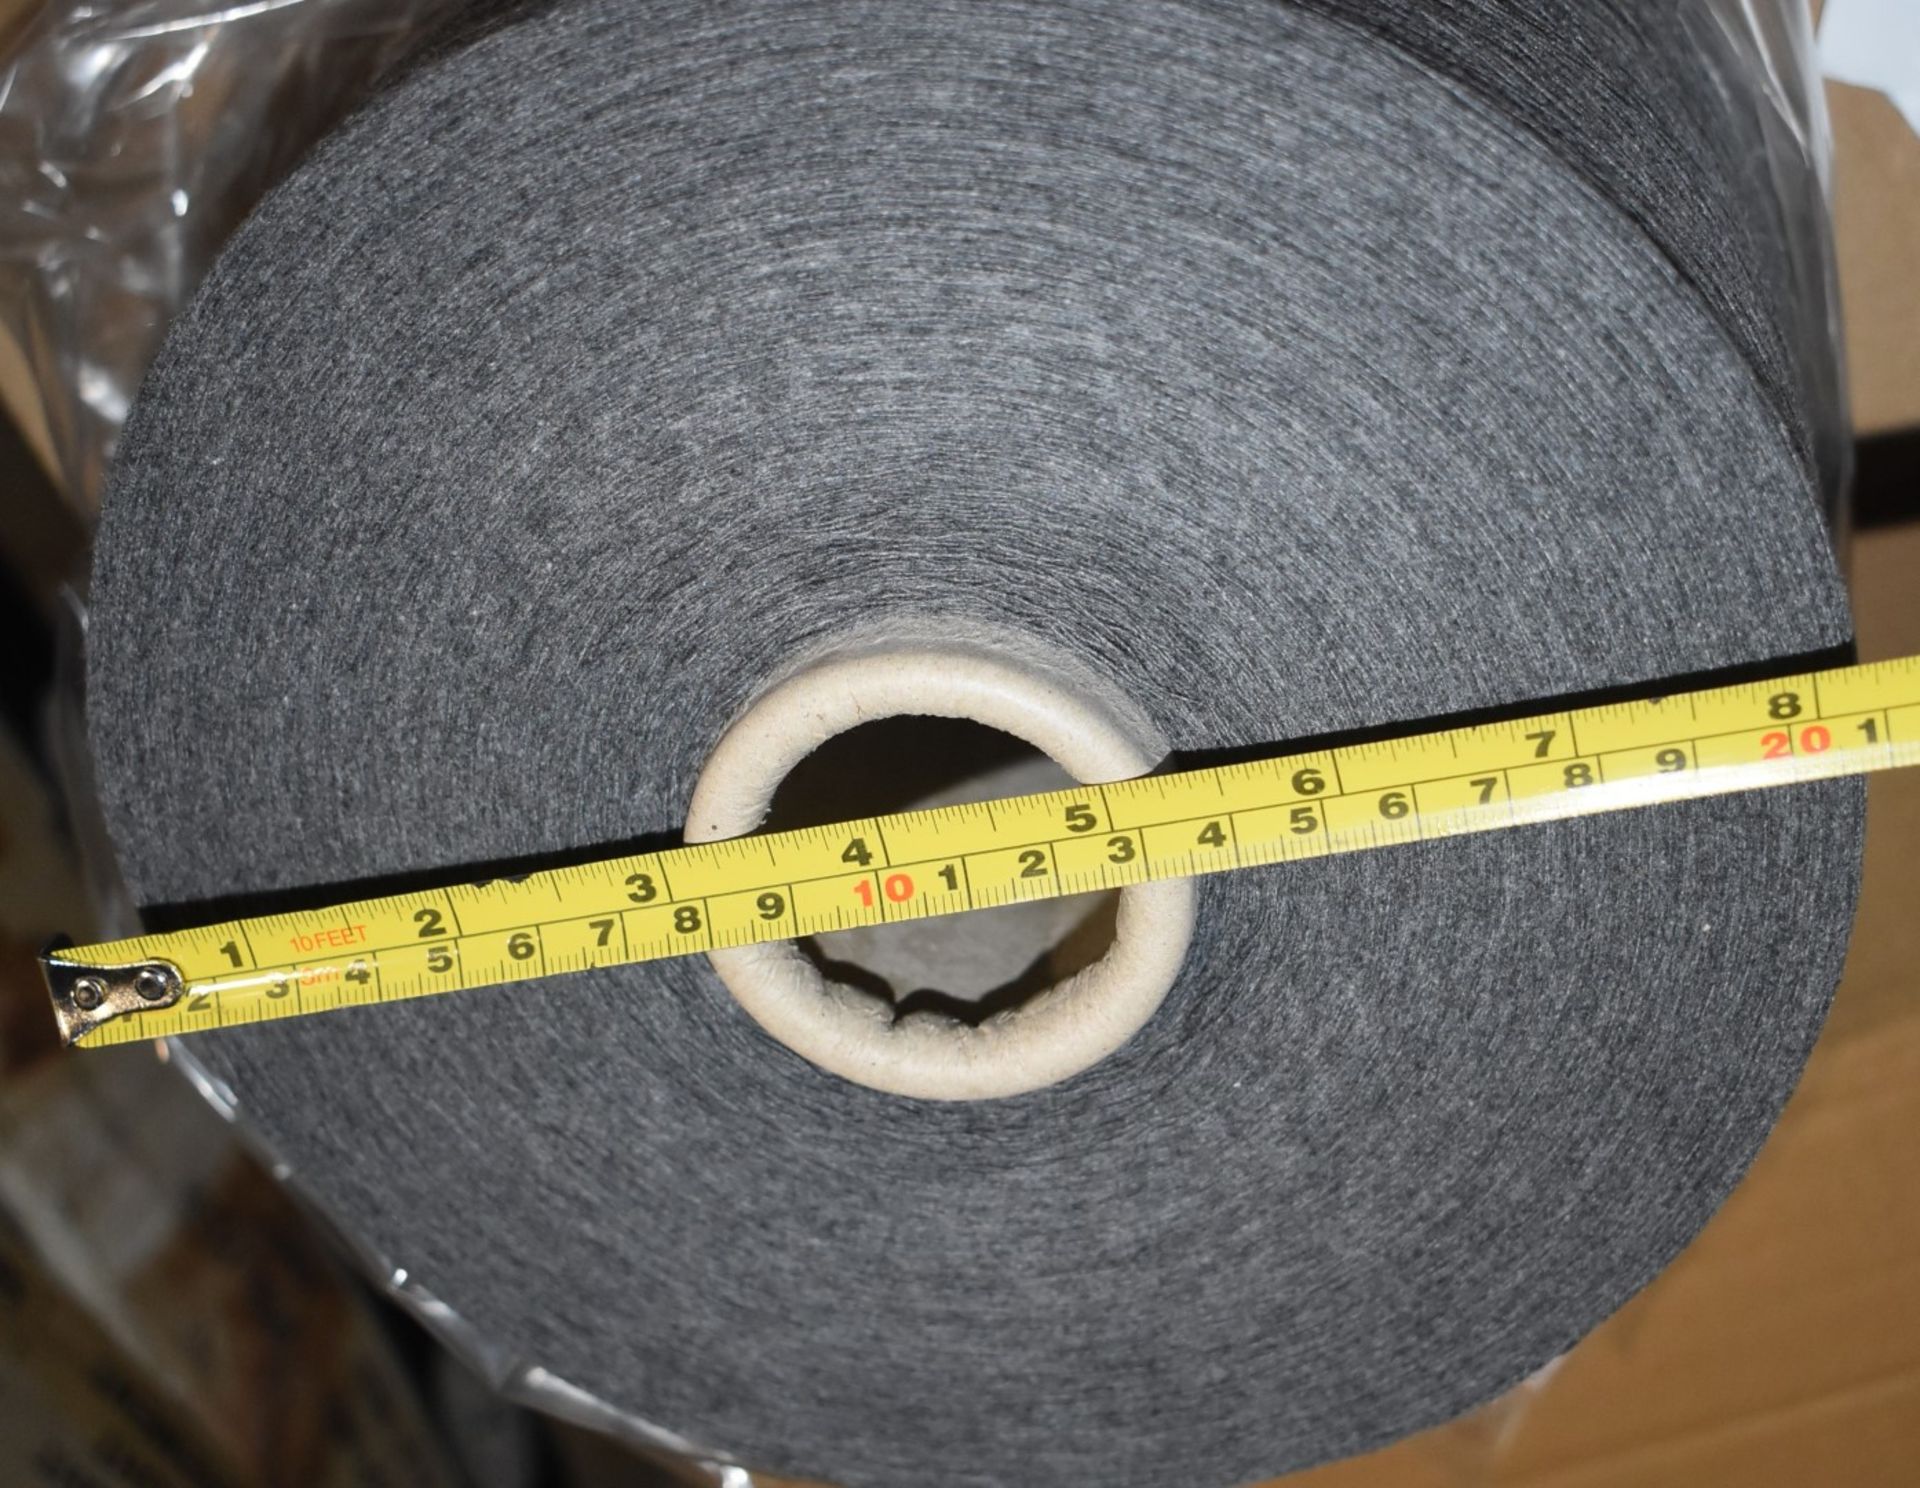 10 x Cones of 1/13 MicroCotton Knitting Yarn - Mid Grey - Approx Weight: 2,500g - New Stock ABL Yarn - Image 13 of 18